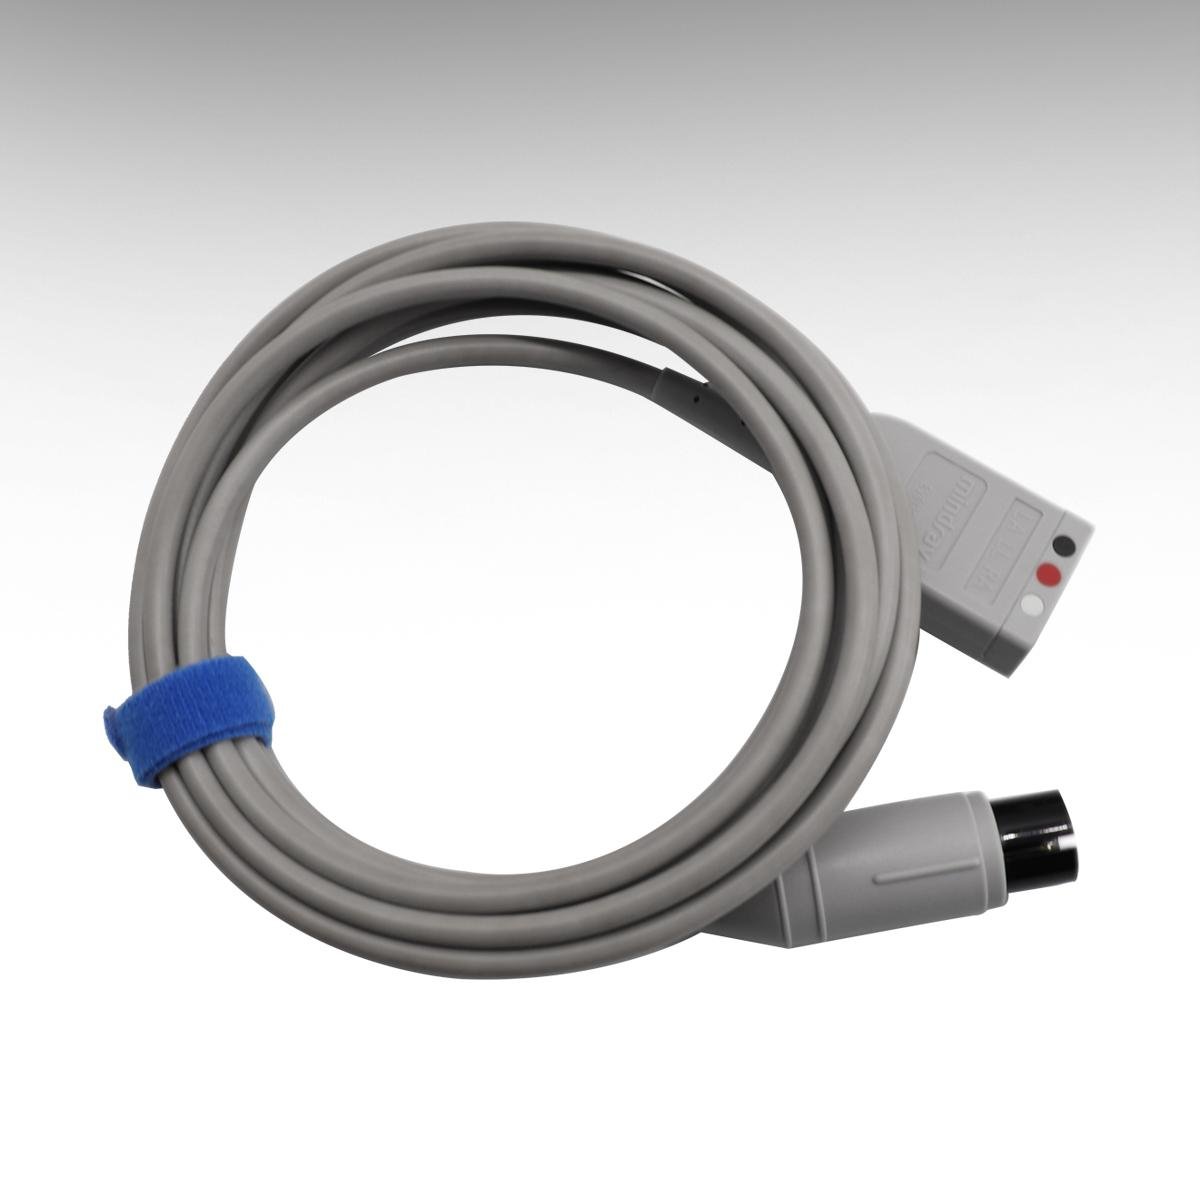 MINDRAY ecg cable low price 6 pins 3 cables EV6130N defibrillation 4